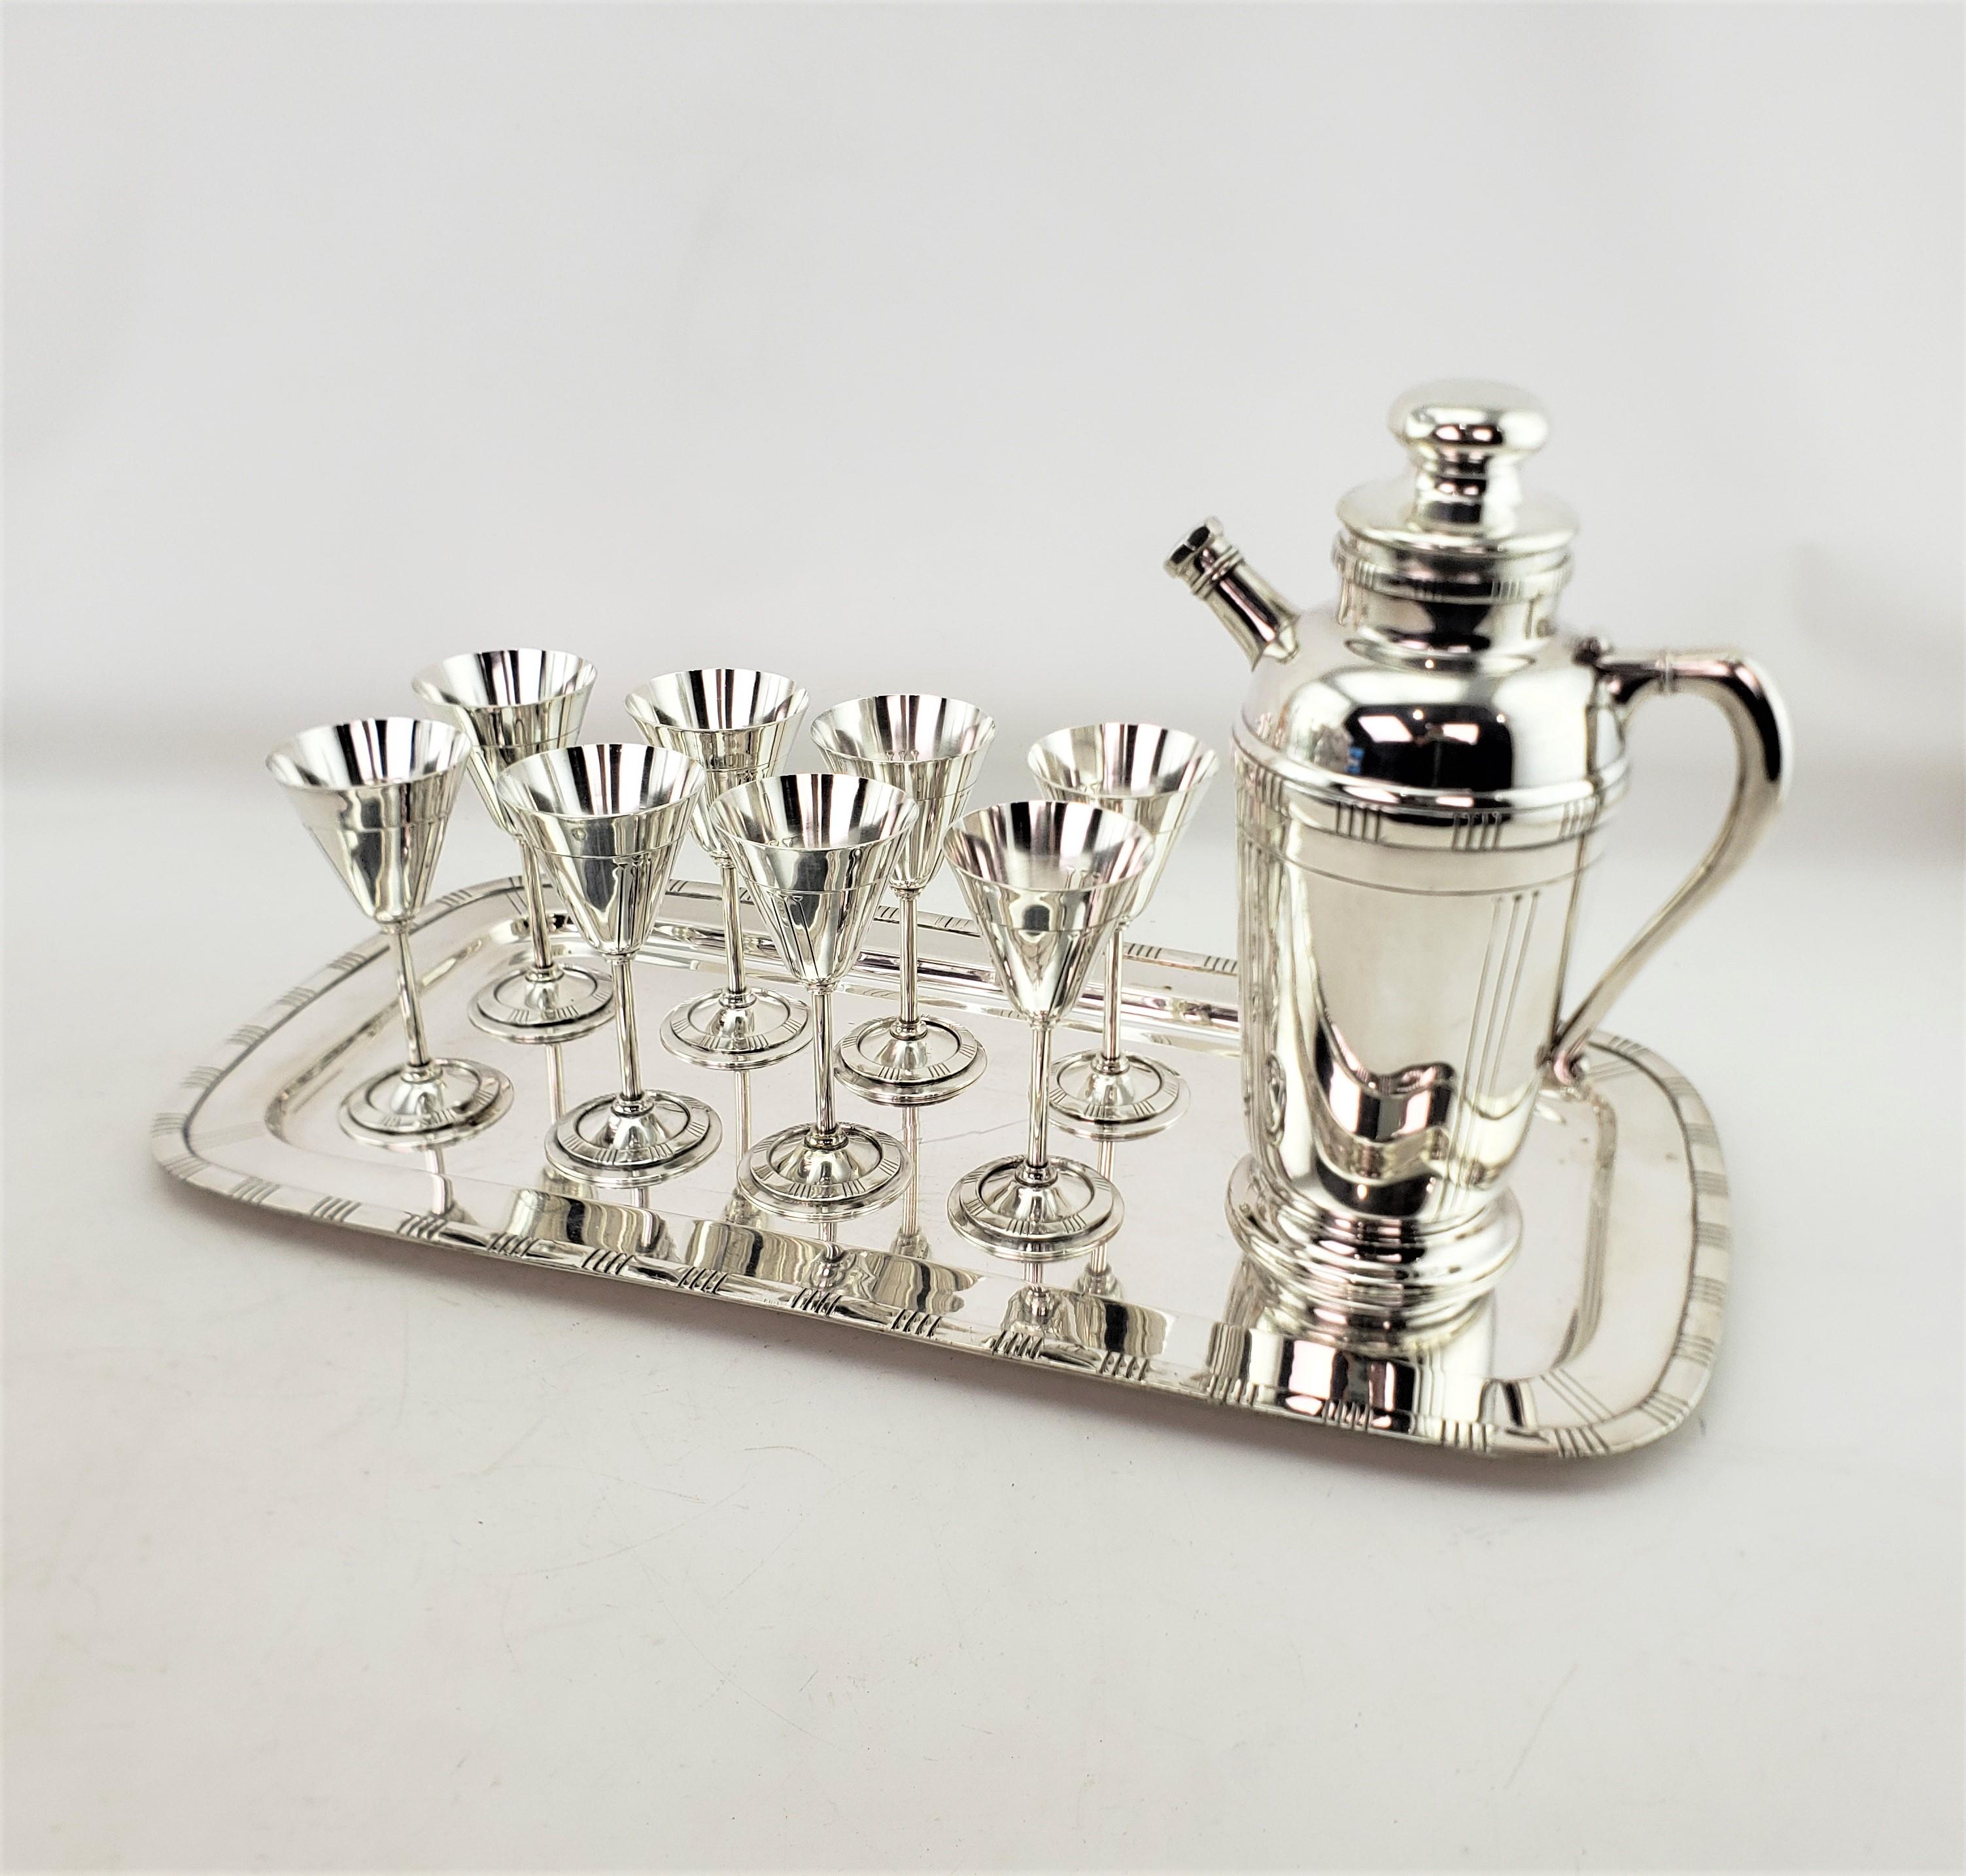 American Midcentury Silver Plated Cocktail Set with Tray, Glasses & Shaker Pitcher For Sale